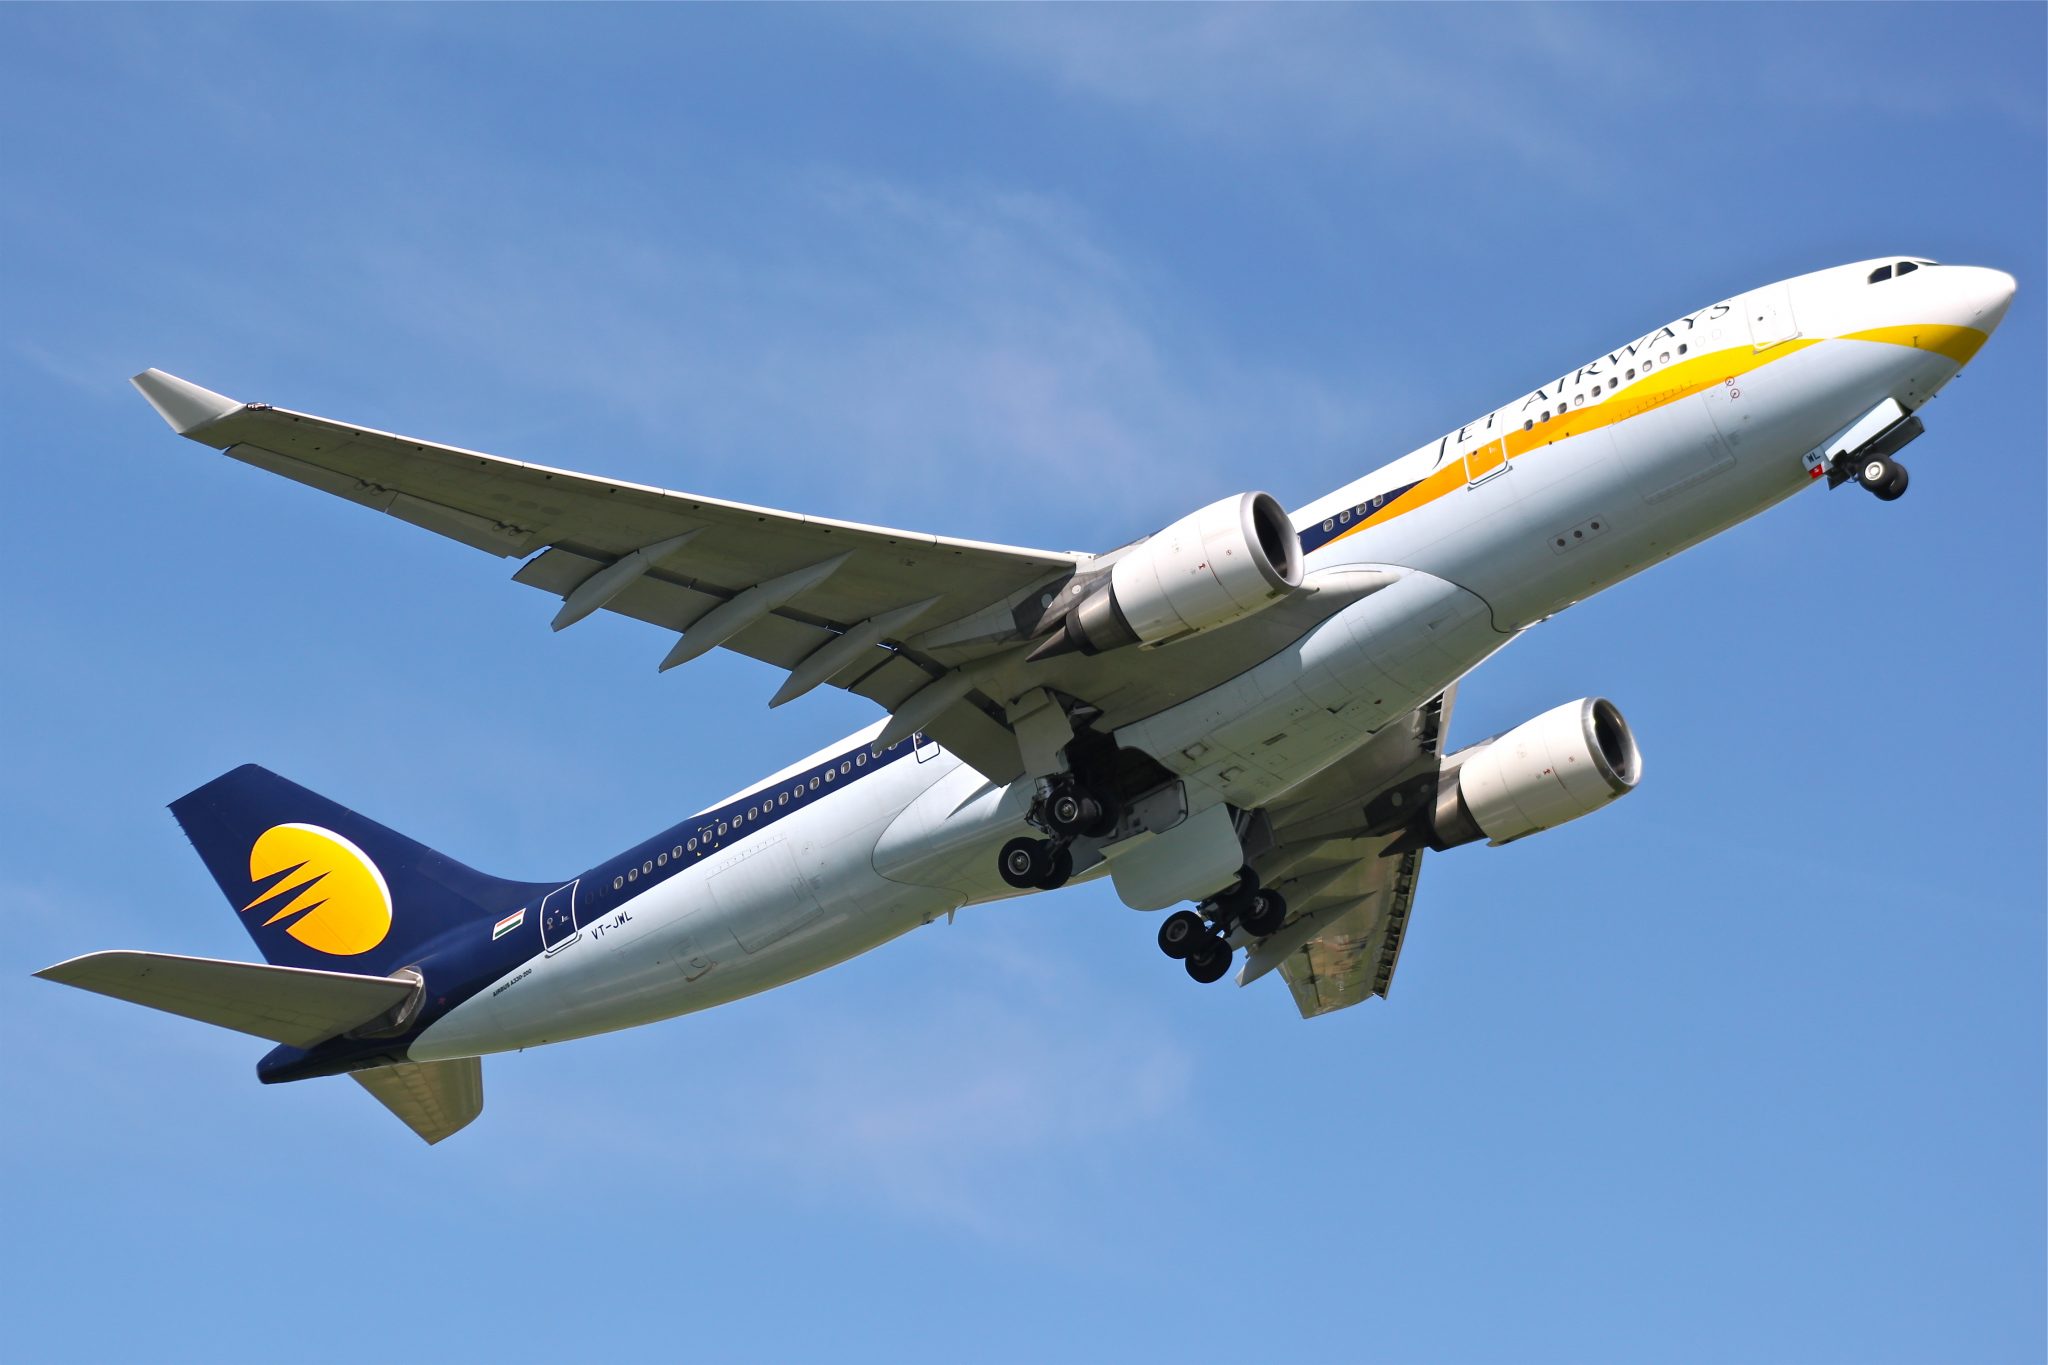 Etihad Airways and Jet Airways sign landmark tourism agreement with the State Government of Maharashtra